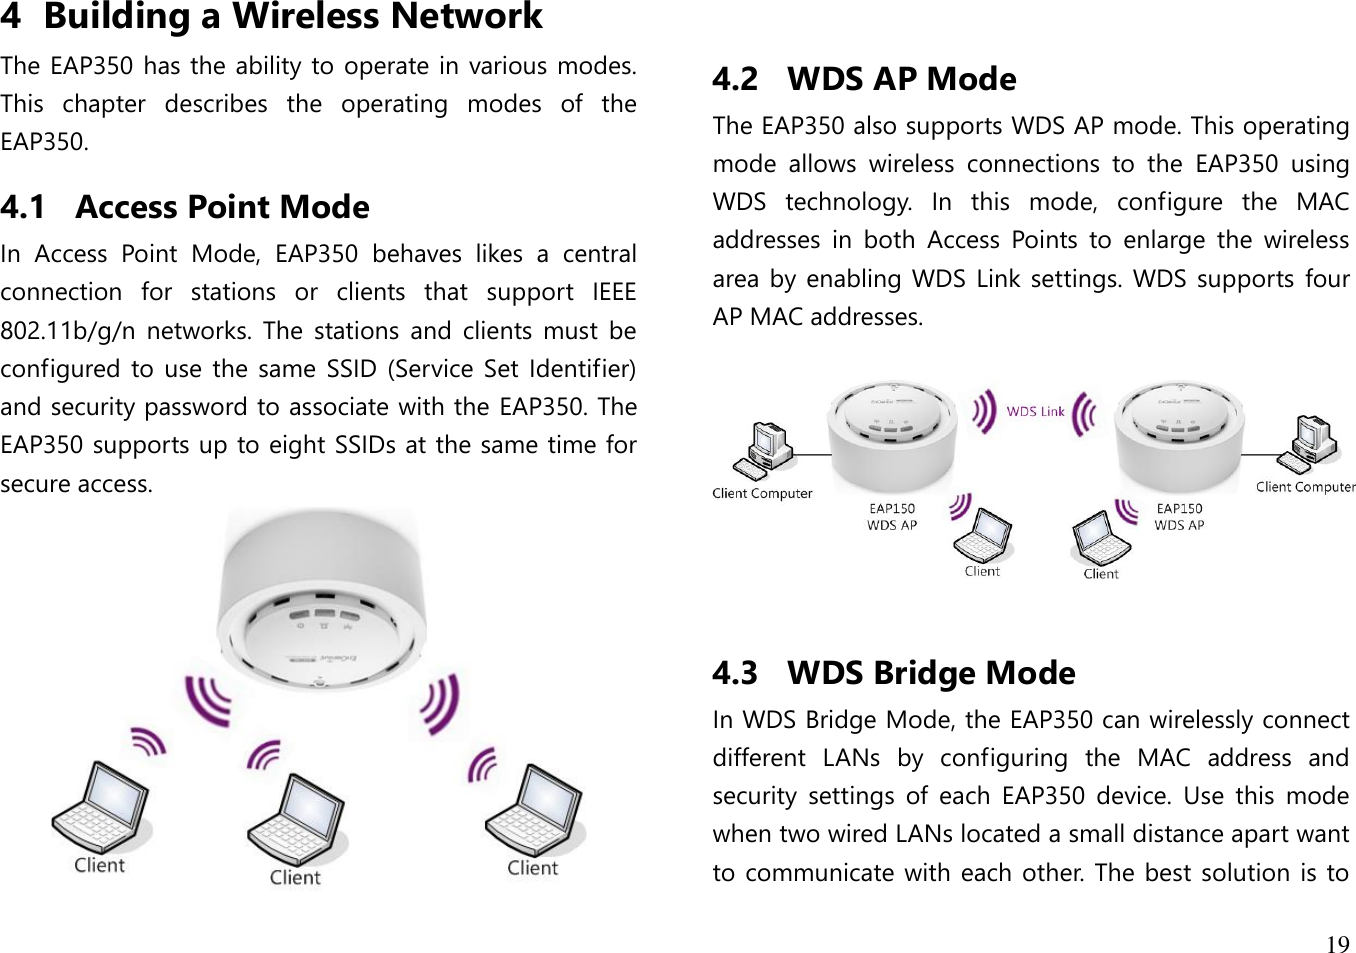  19  4 Building a Wireless Network The EAP350 has the ability to operate in various modes. This  chapter  describes  the  operating  modes  of  the EAP350. 4.1 Access Point Mode In  Access  Point  Mode,  EAP350  behaves  likes  a  central connection  for  stations  or  clients  that  support  IEEE 802.11b/g/n  networks.  The  stations  and  clients  must  be configured to  use the  same  SSID  (Service  Set Identifier) and security password to associate with the EAP350. The EAP350 supports up to eight SSIDs at the same time for secure access.     4.2 WDS AP Mode The EAP350 also supports WDS AP mode. This operating mode  allows  wireless  connections  to  the  EAP350  using WDS  technology.  In  this  mode,  configure  the  MAC addresses  in  both  Access  Points  to  enlarge  the  wireless area by enabling WDS  Link  settings. WDS  supports  four AP MAC addresses.    4.3 WDS Bridge Mode In WDS Bridge Mode, the EAP350 can wirelessly connect different  LANs  by  configuring  the  MAC  address  and security  settings  of  each  EAP350  device.  Use  this  mode when two wired LANs located a small distance apart want to communicate with each other. The best  solution is to 